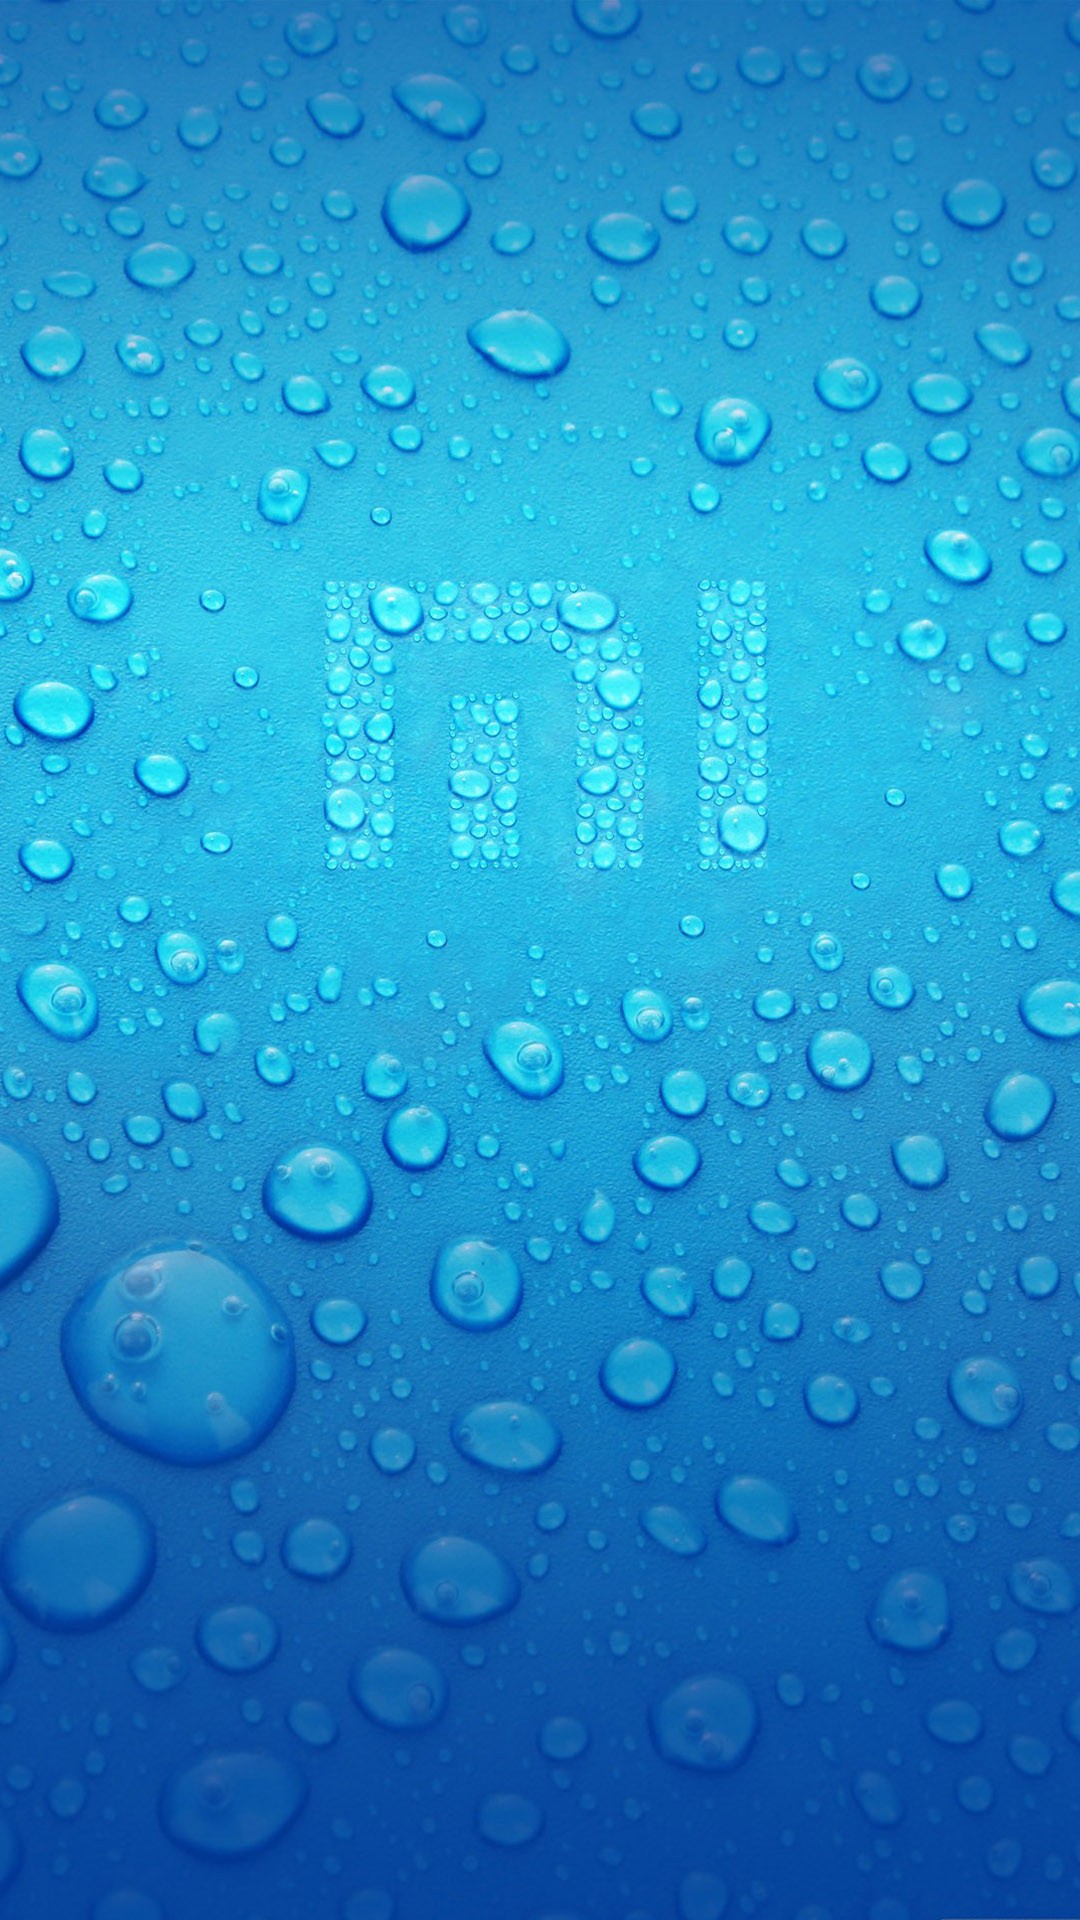 home water blue water drops 1 s4 wallpaper 1080x1920